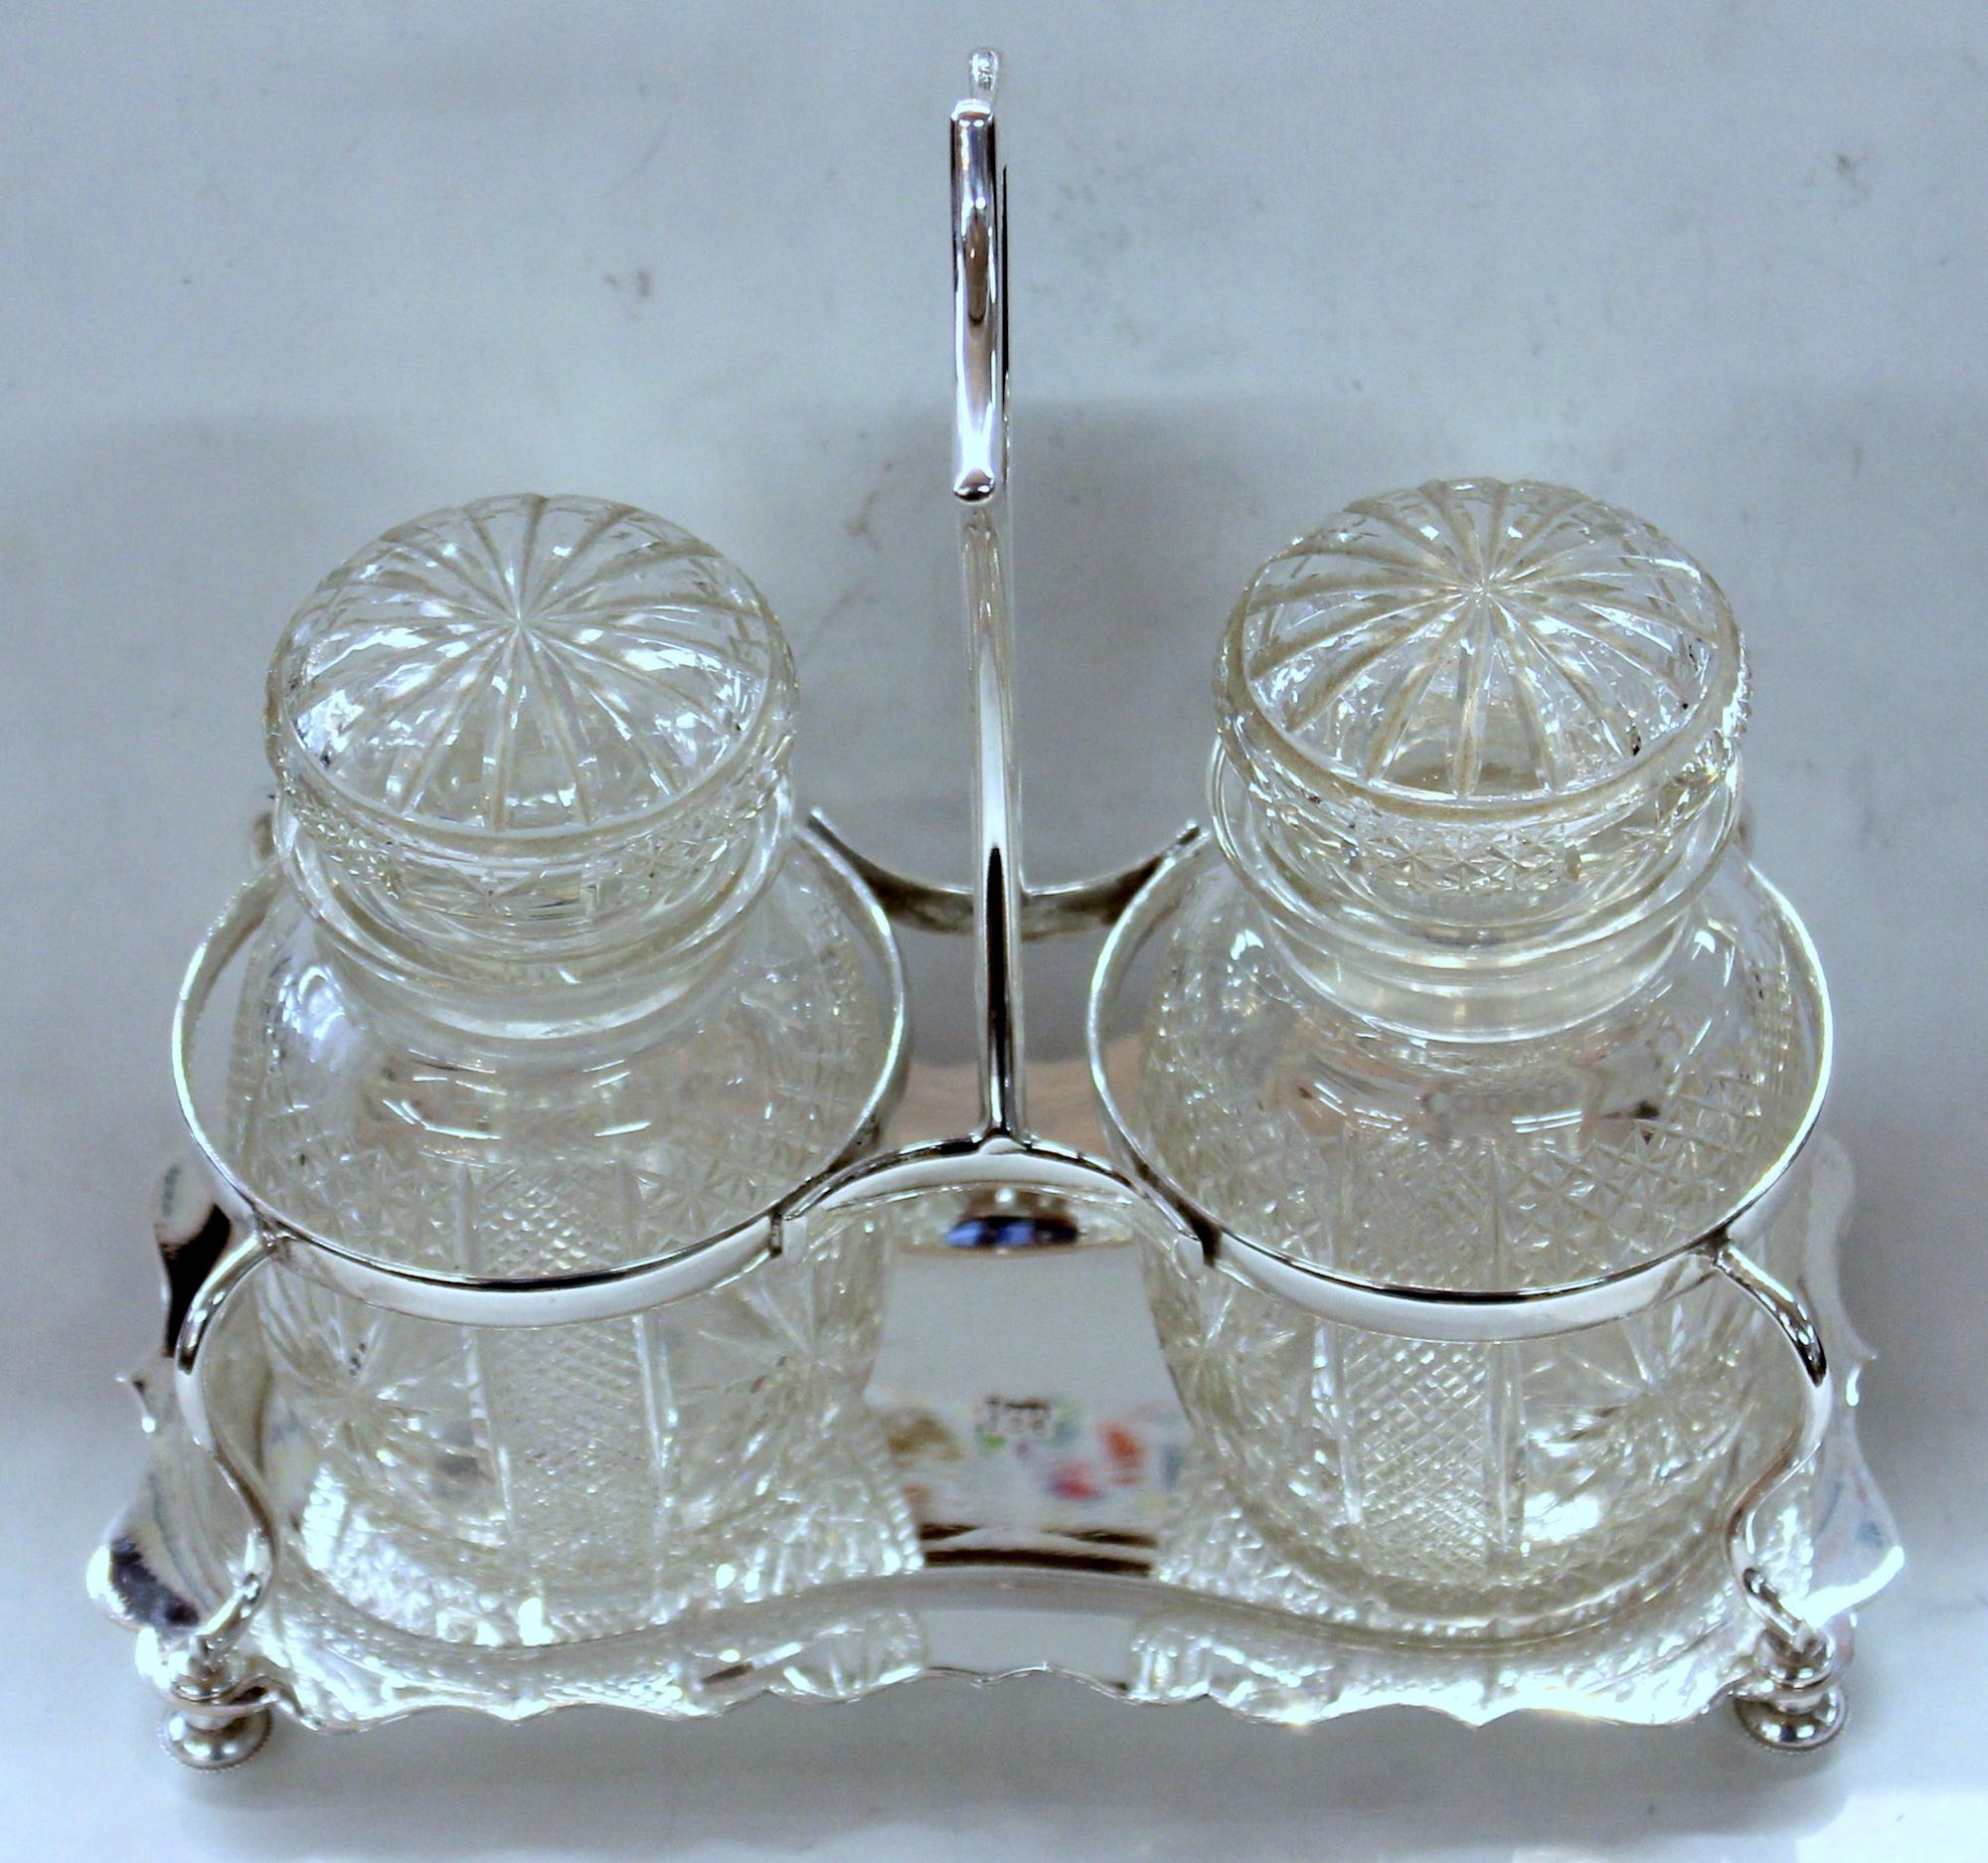 Fabulous quality finest hand-cut crystal barrel shape double jar pickle set; pristine condition. Please note exceptional cutting.